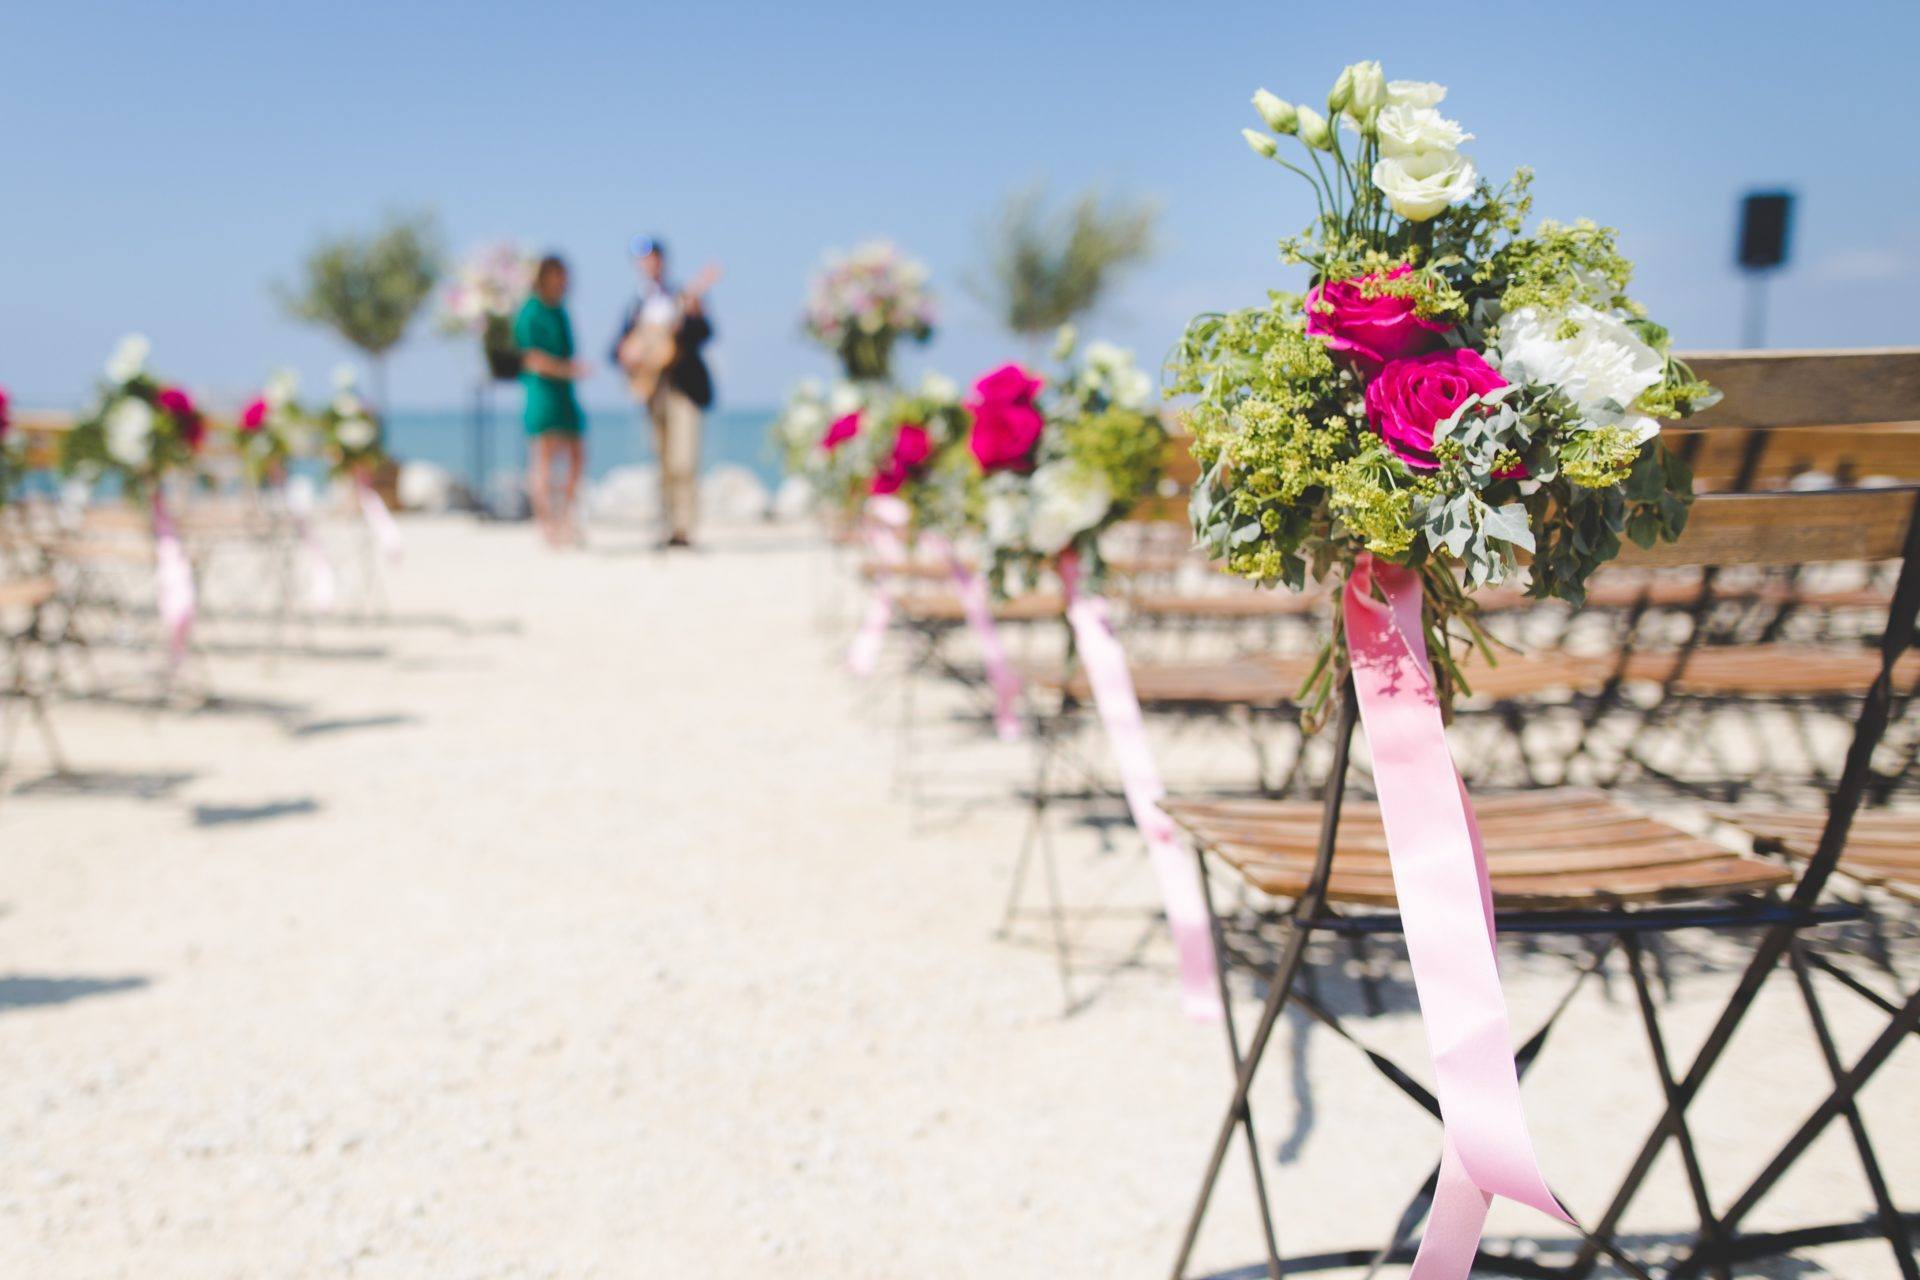 Chairs set up for beach wedding.